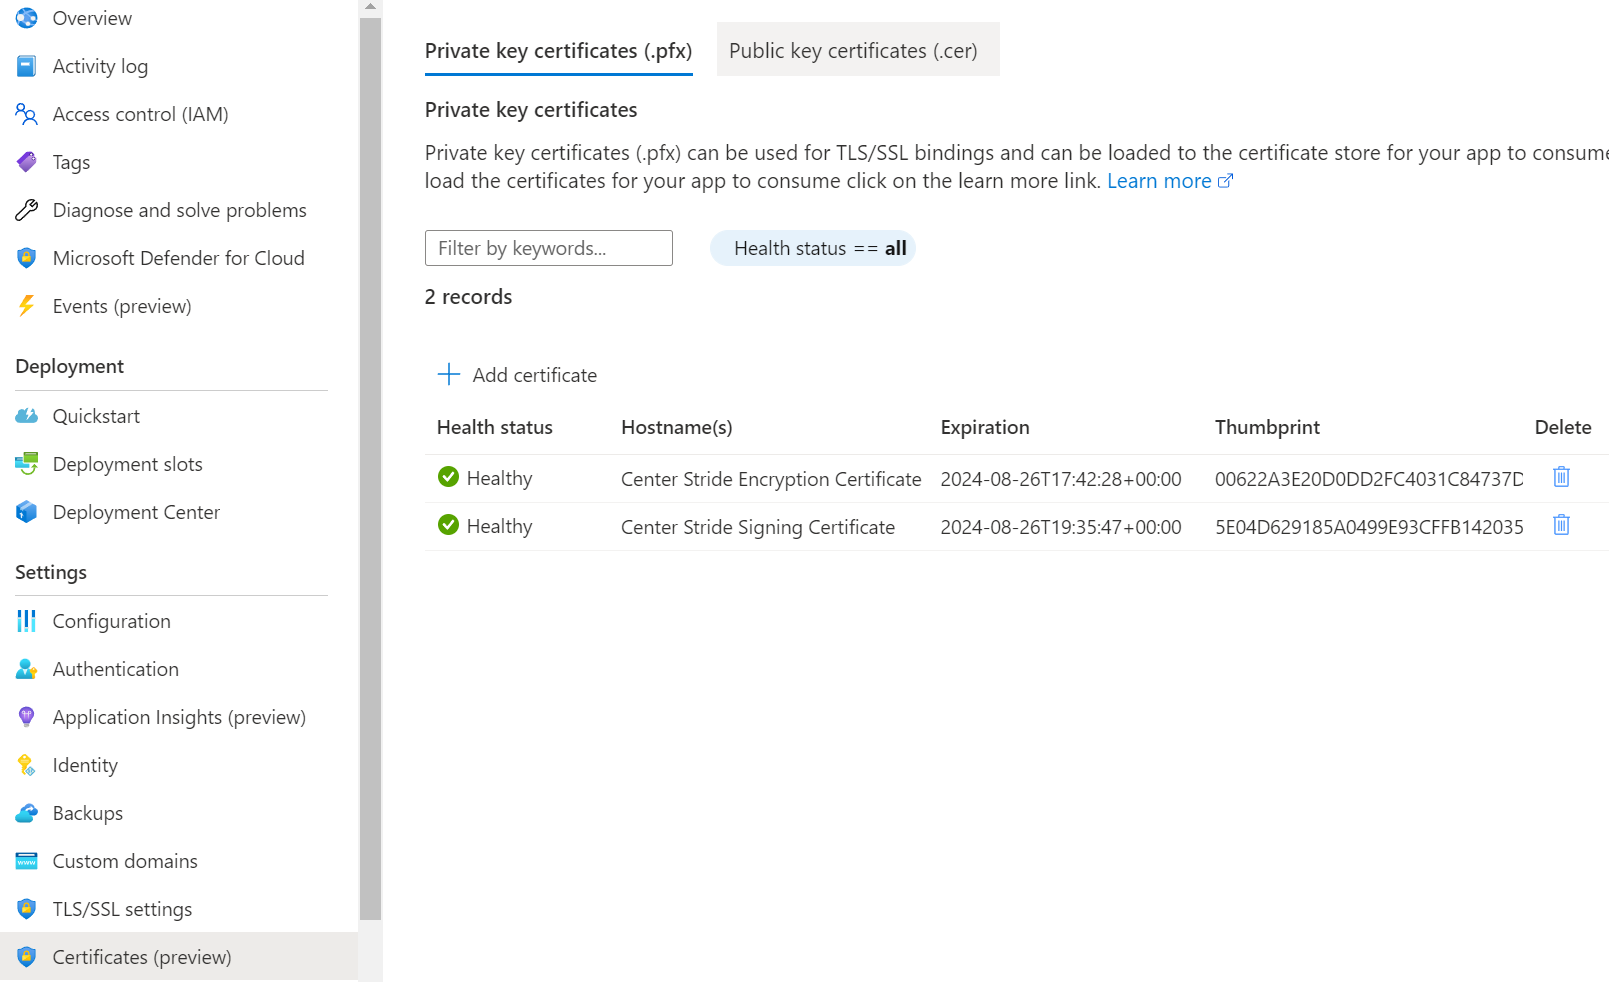 Azure App Service certificate summary screen after uploading both certificates